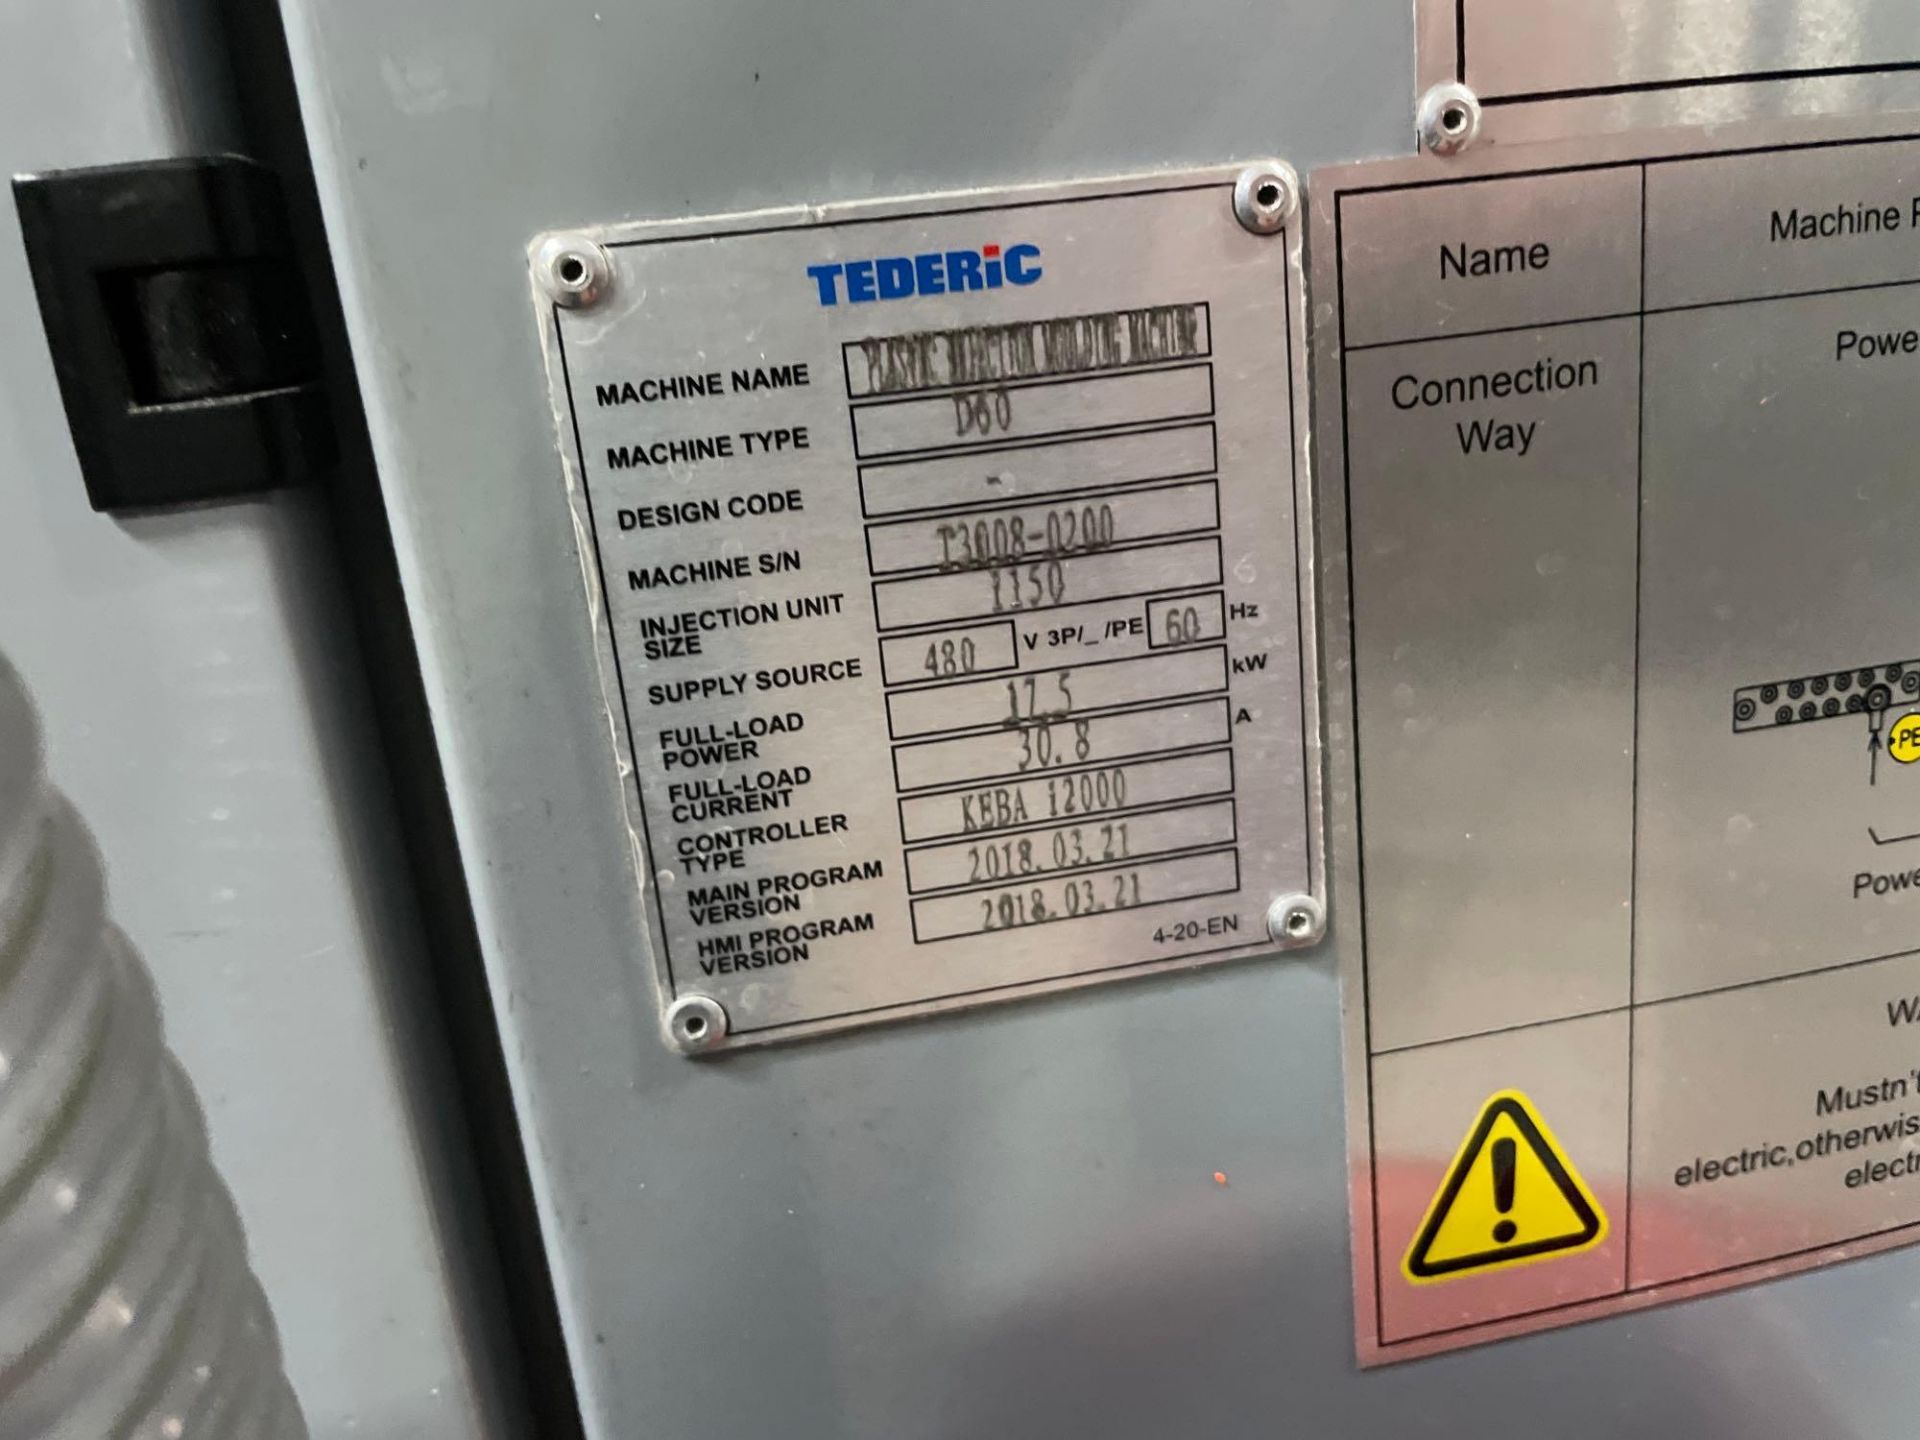 66 Ton Tederic D60 Plastic Injection Molder, Keba 12000 Control, s/n T3008-0200, New 2018 - Image 17 of 17